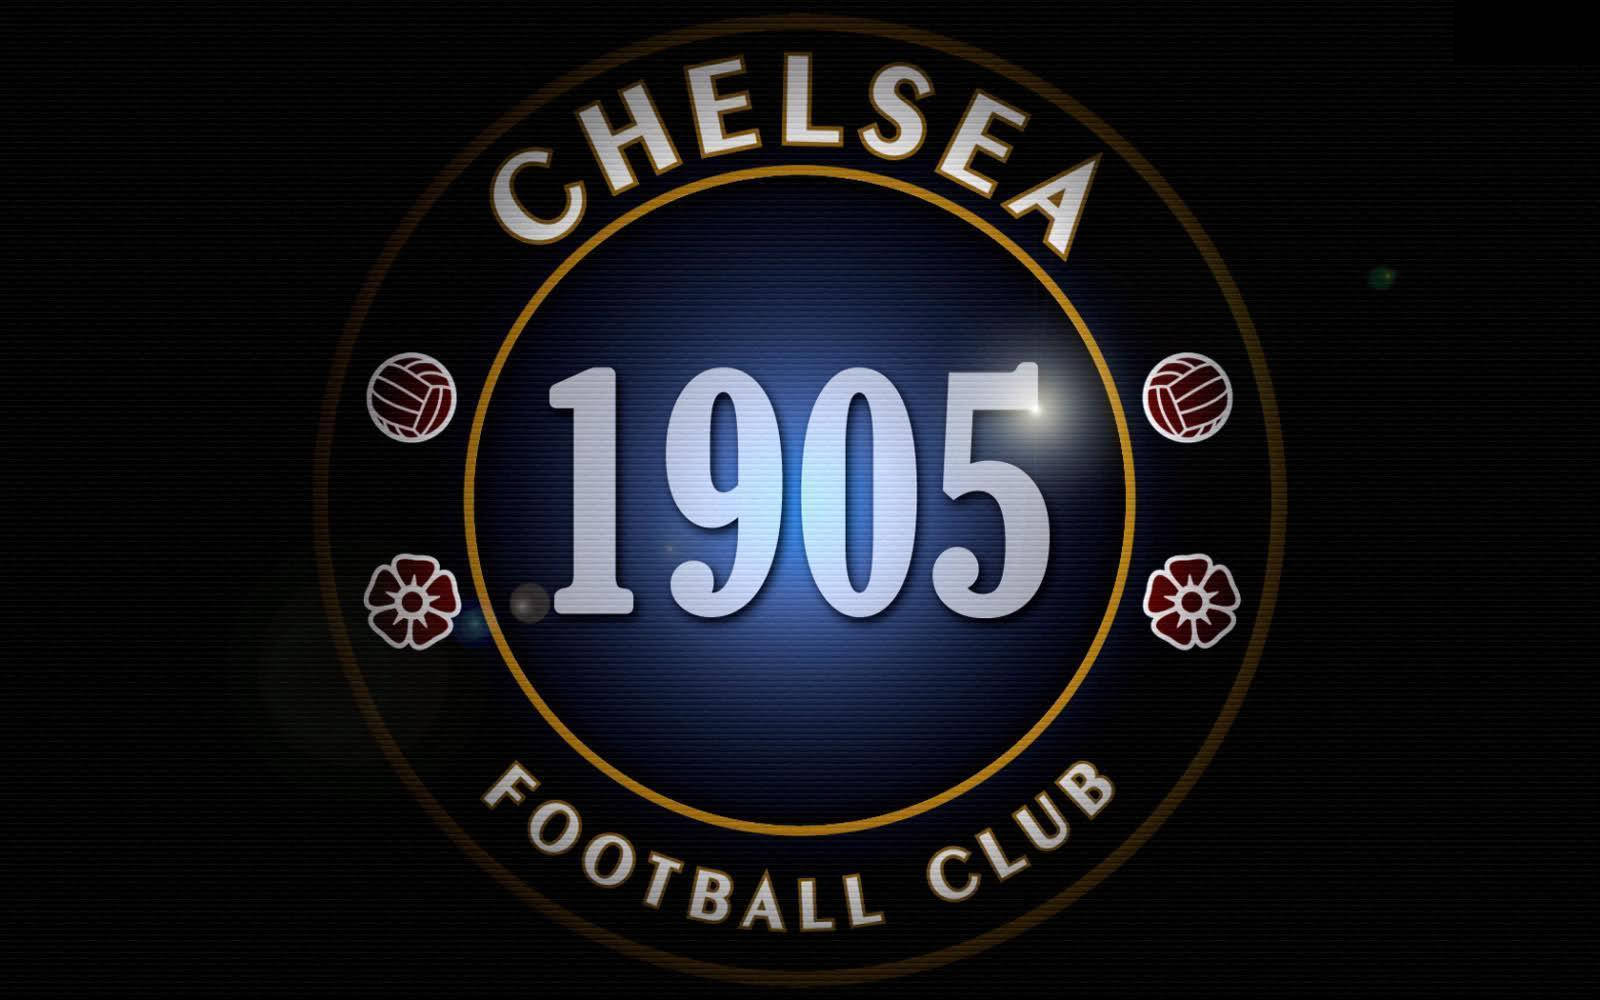 Chelsea Fc Logo With Founding Year Wallpaper